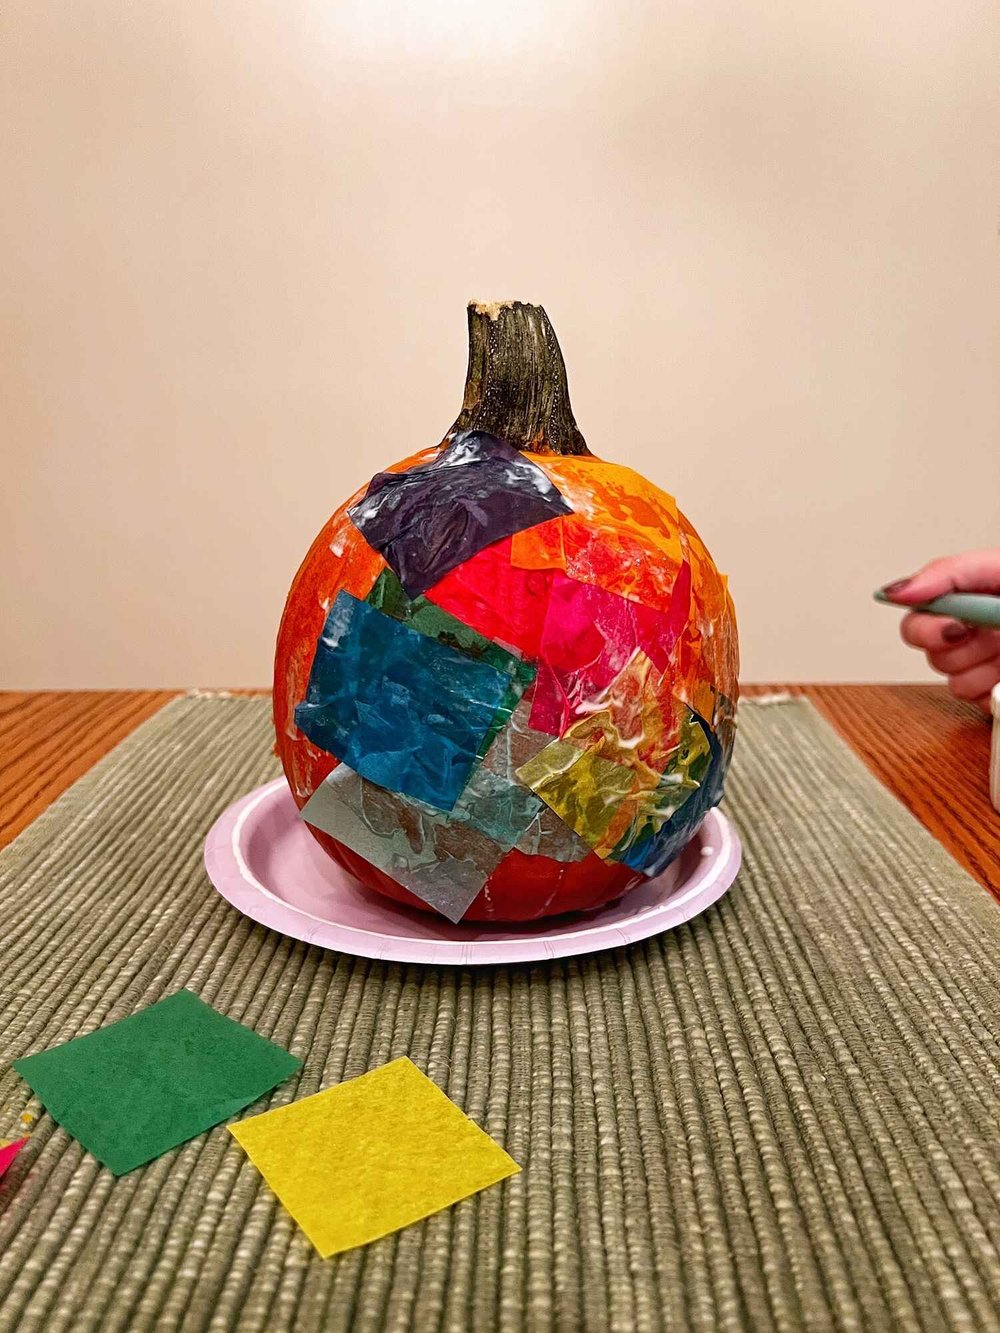 No Carve Pumpkin Decorating Ideas for Your Toddler Scary Stained Glass 1 (1).jpg